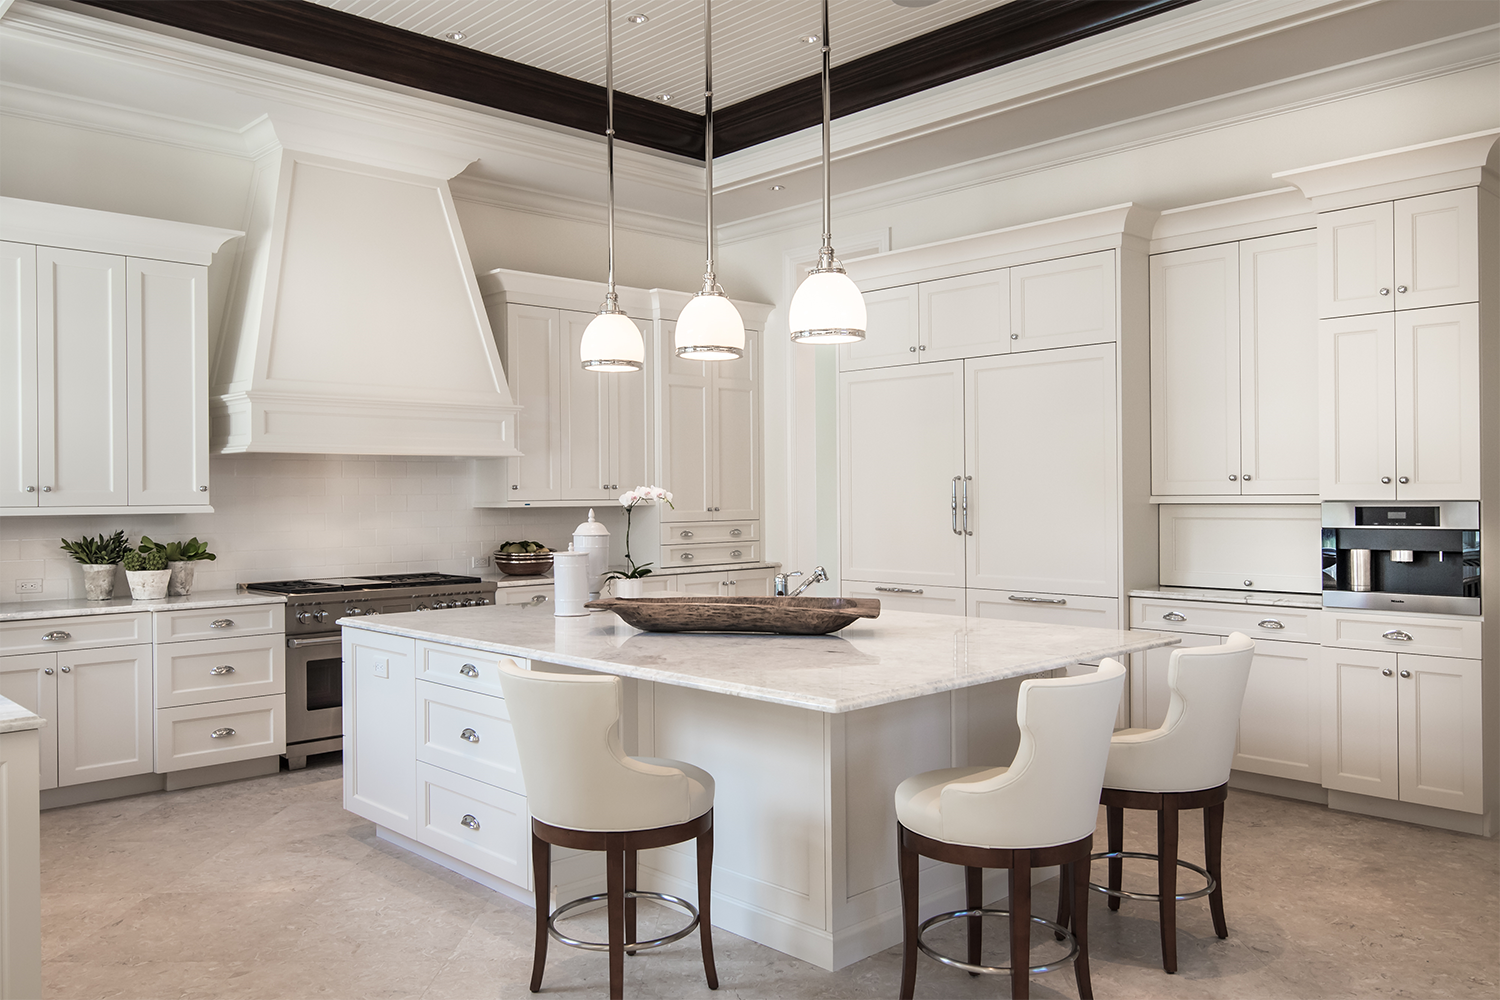 Using Cabinetry To Make An All-White Kitchen Interesting – JLJ Back To ...